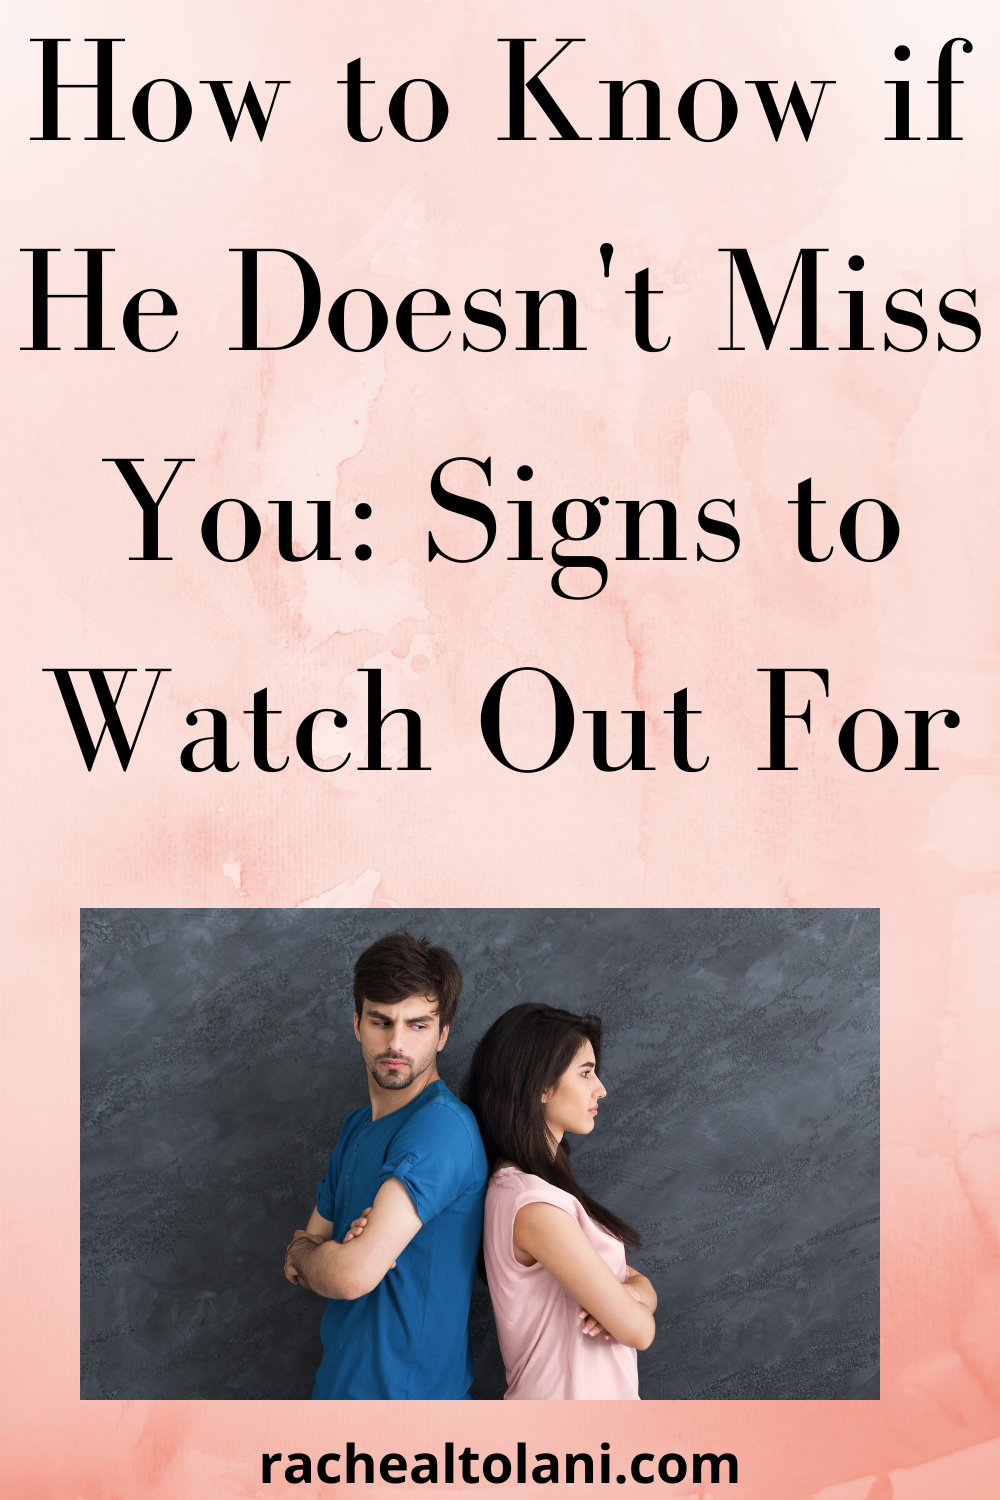 How to Know if He Doesn't Miss You